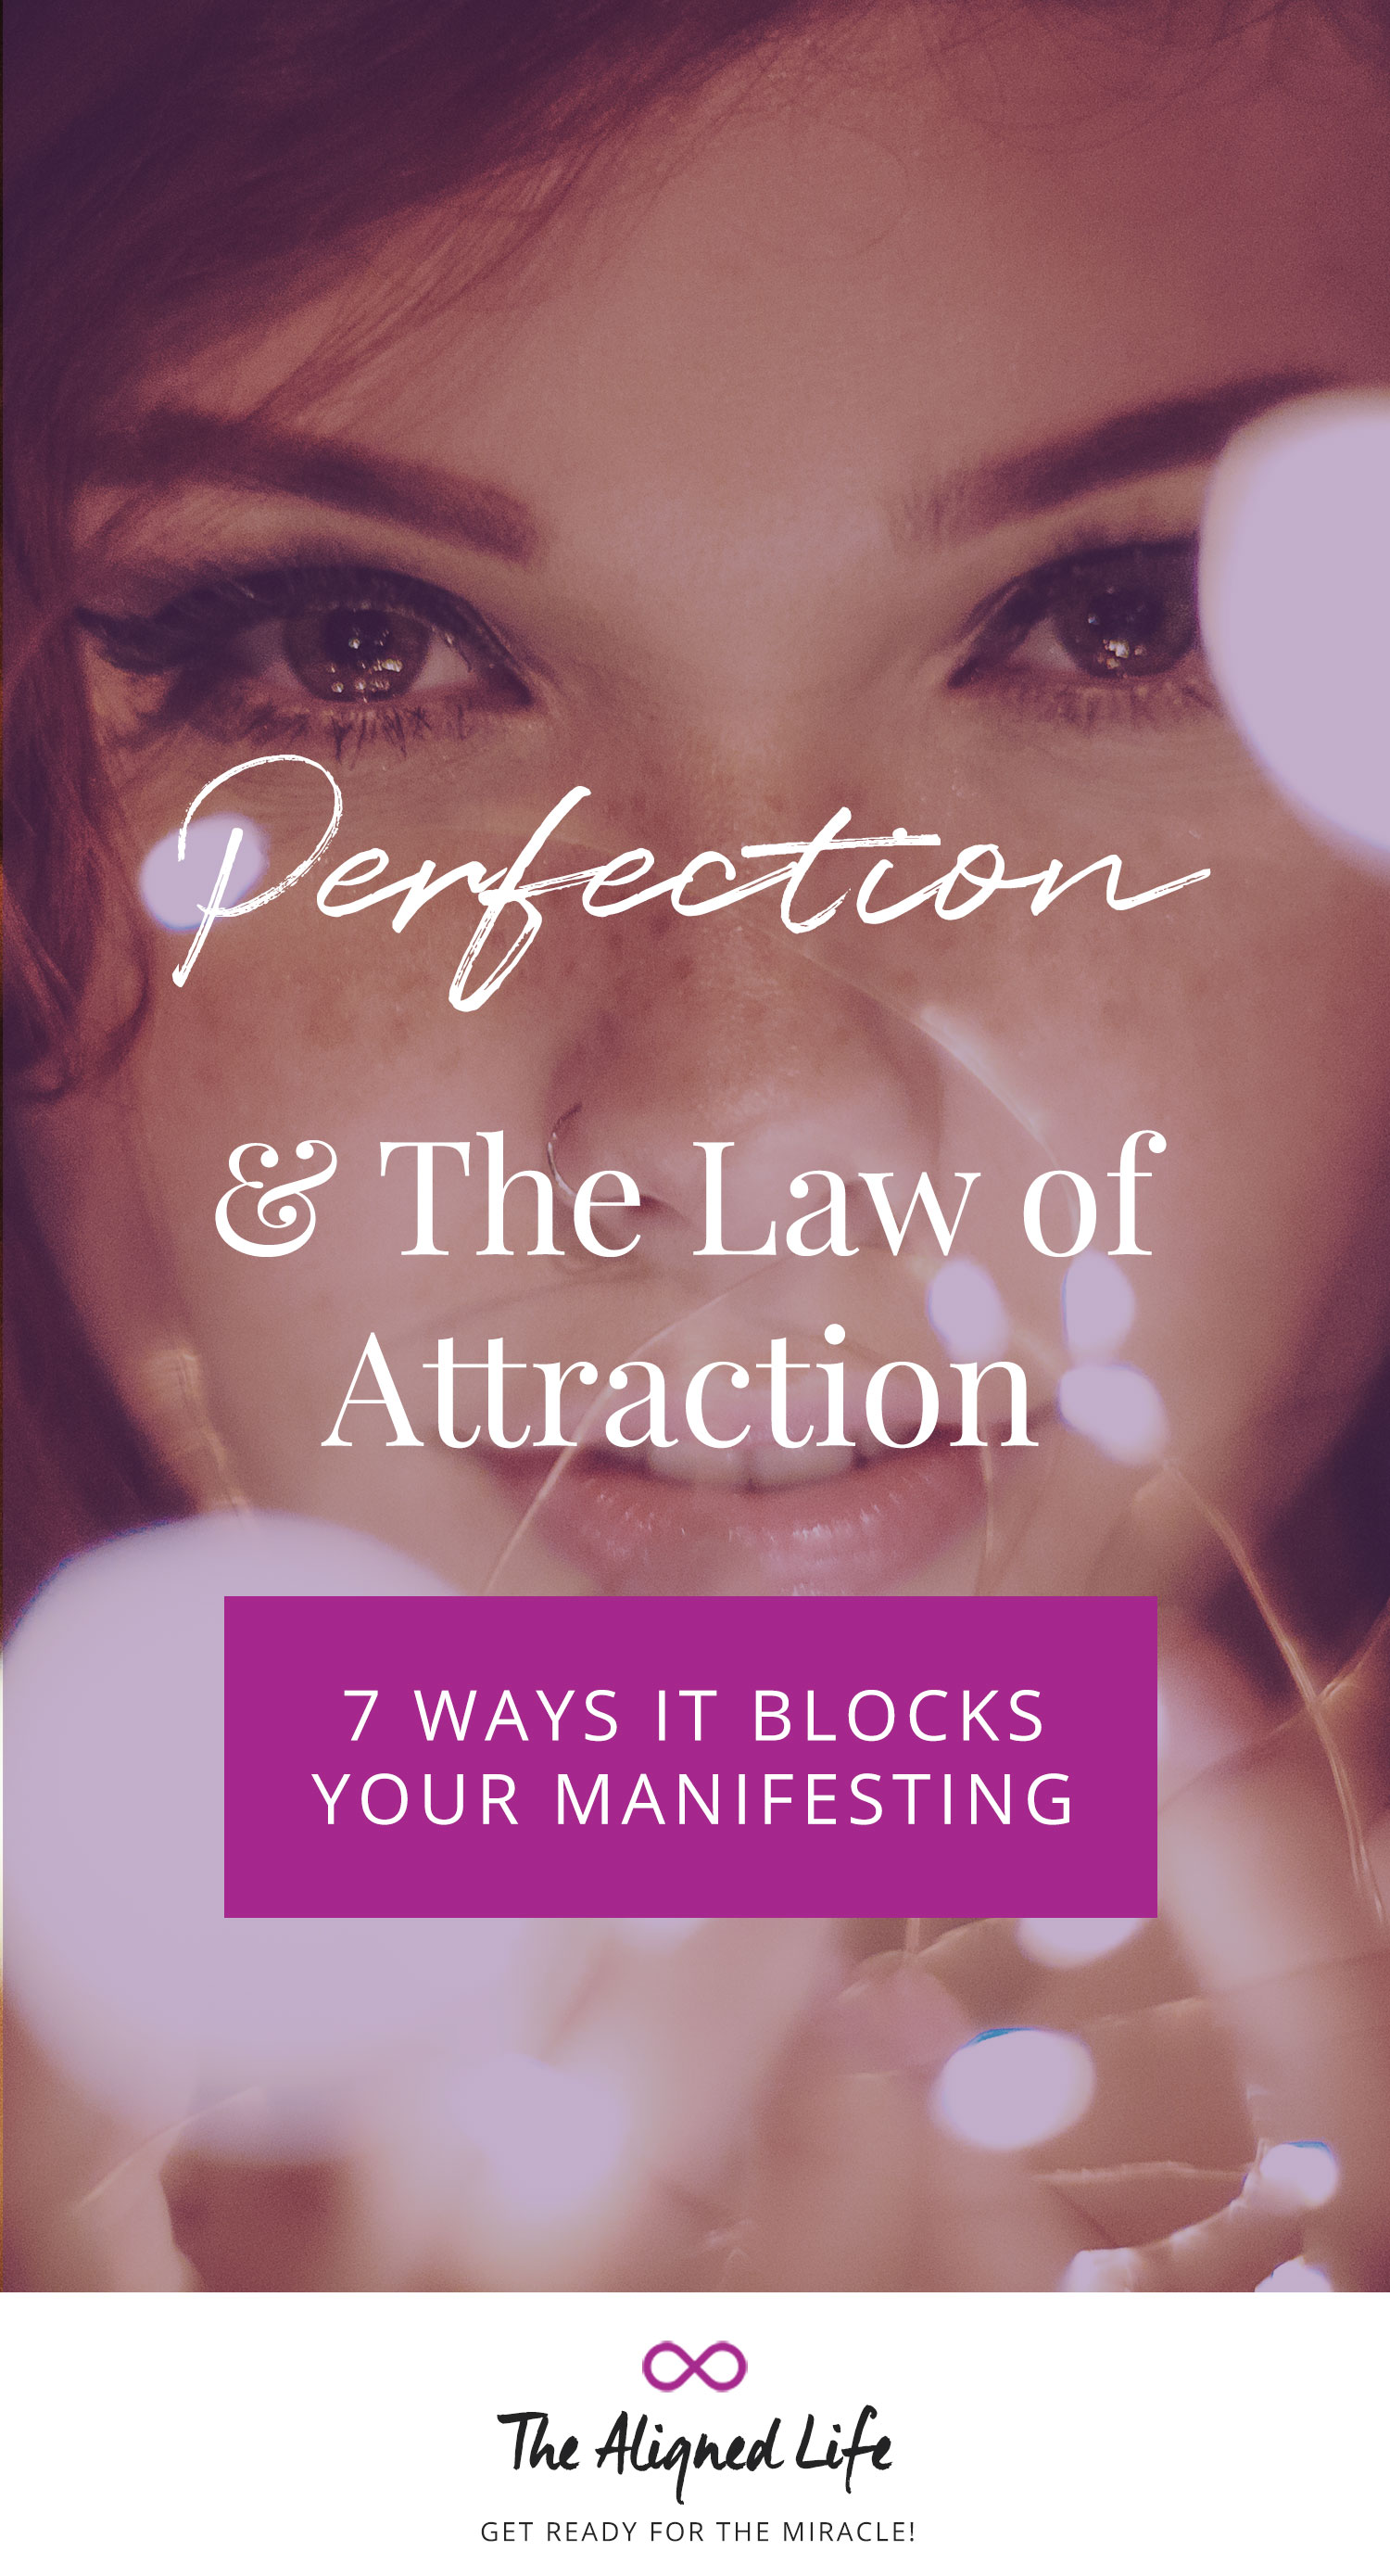 Perfection & The Law of Attraction: 7 Ways It Blocks Your Manifesting